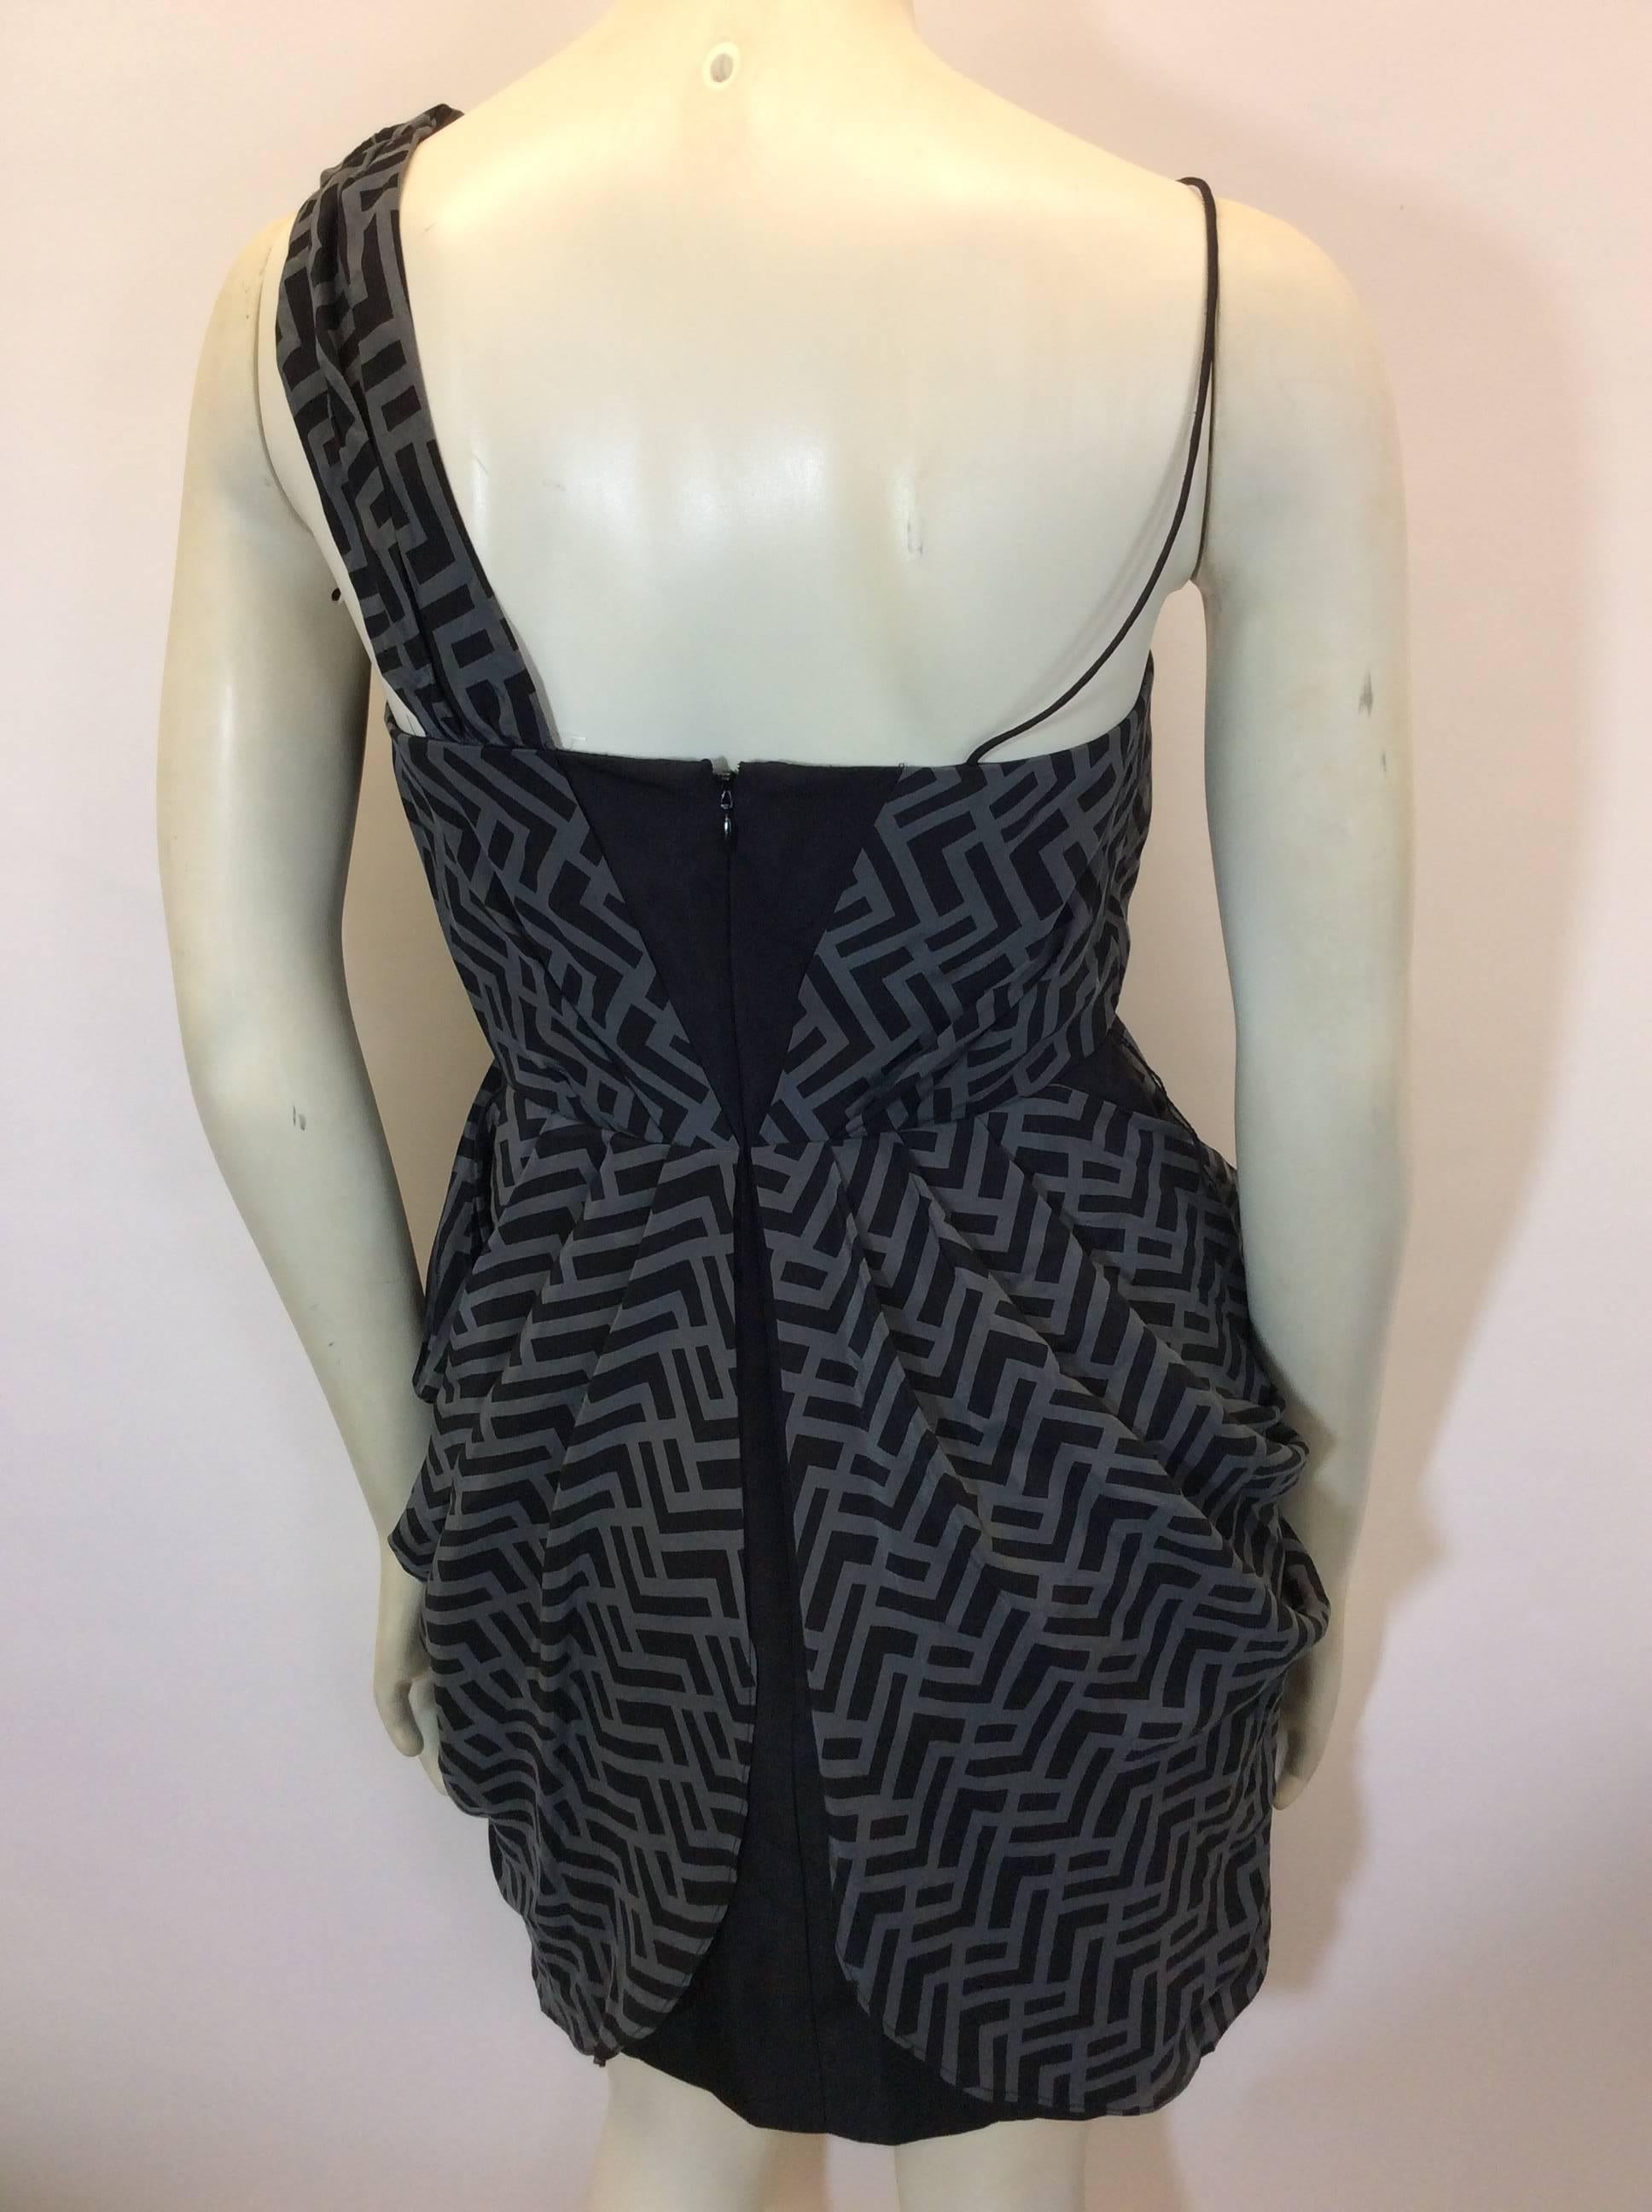 Alexander McQueen Chevron Print Asymmetrical Dress In Excellent Condition For Sale In Narberth, PA